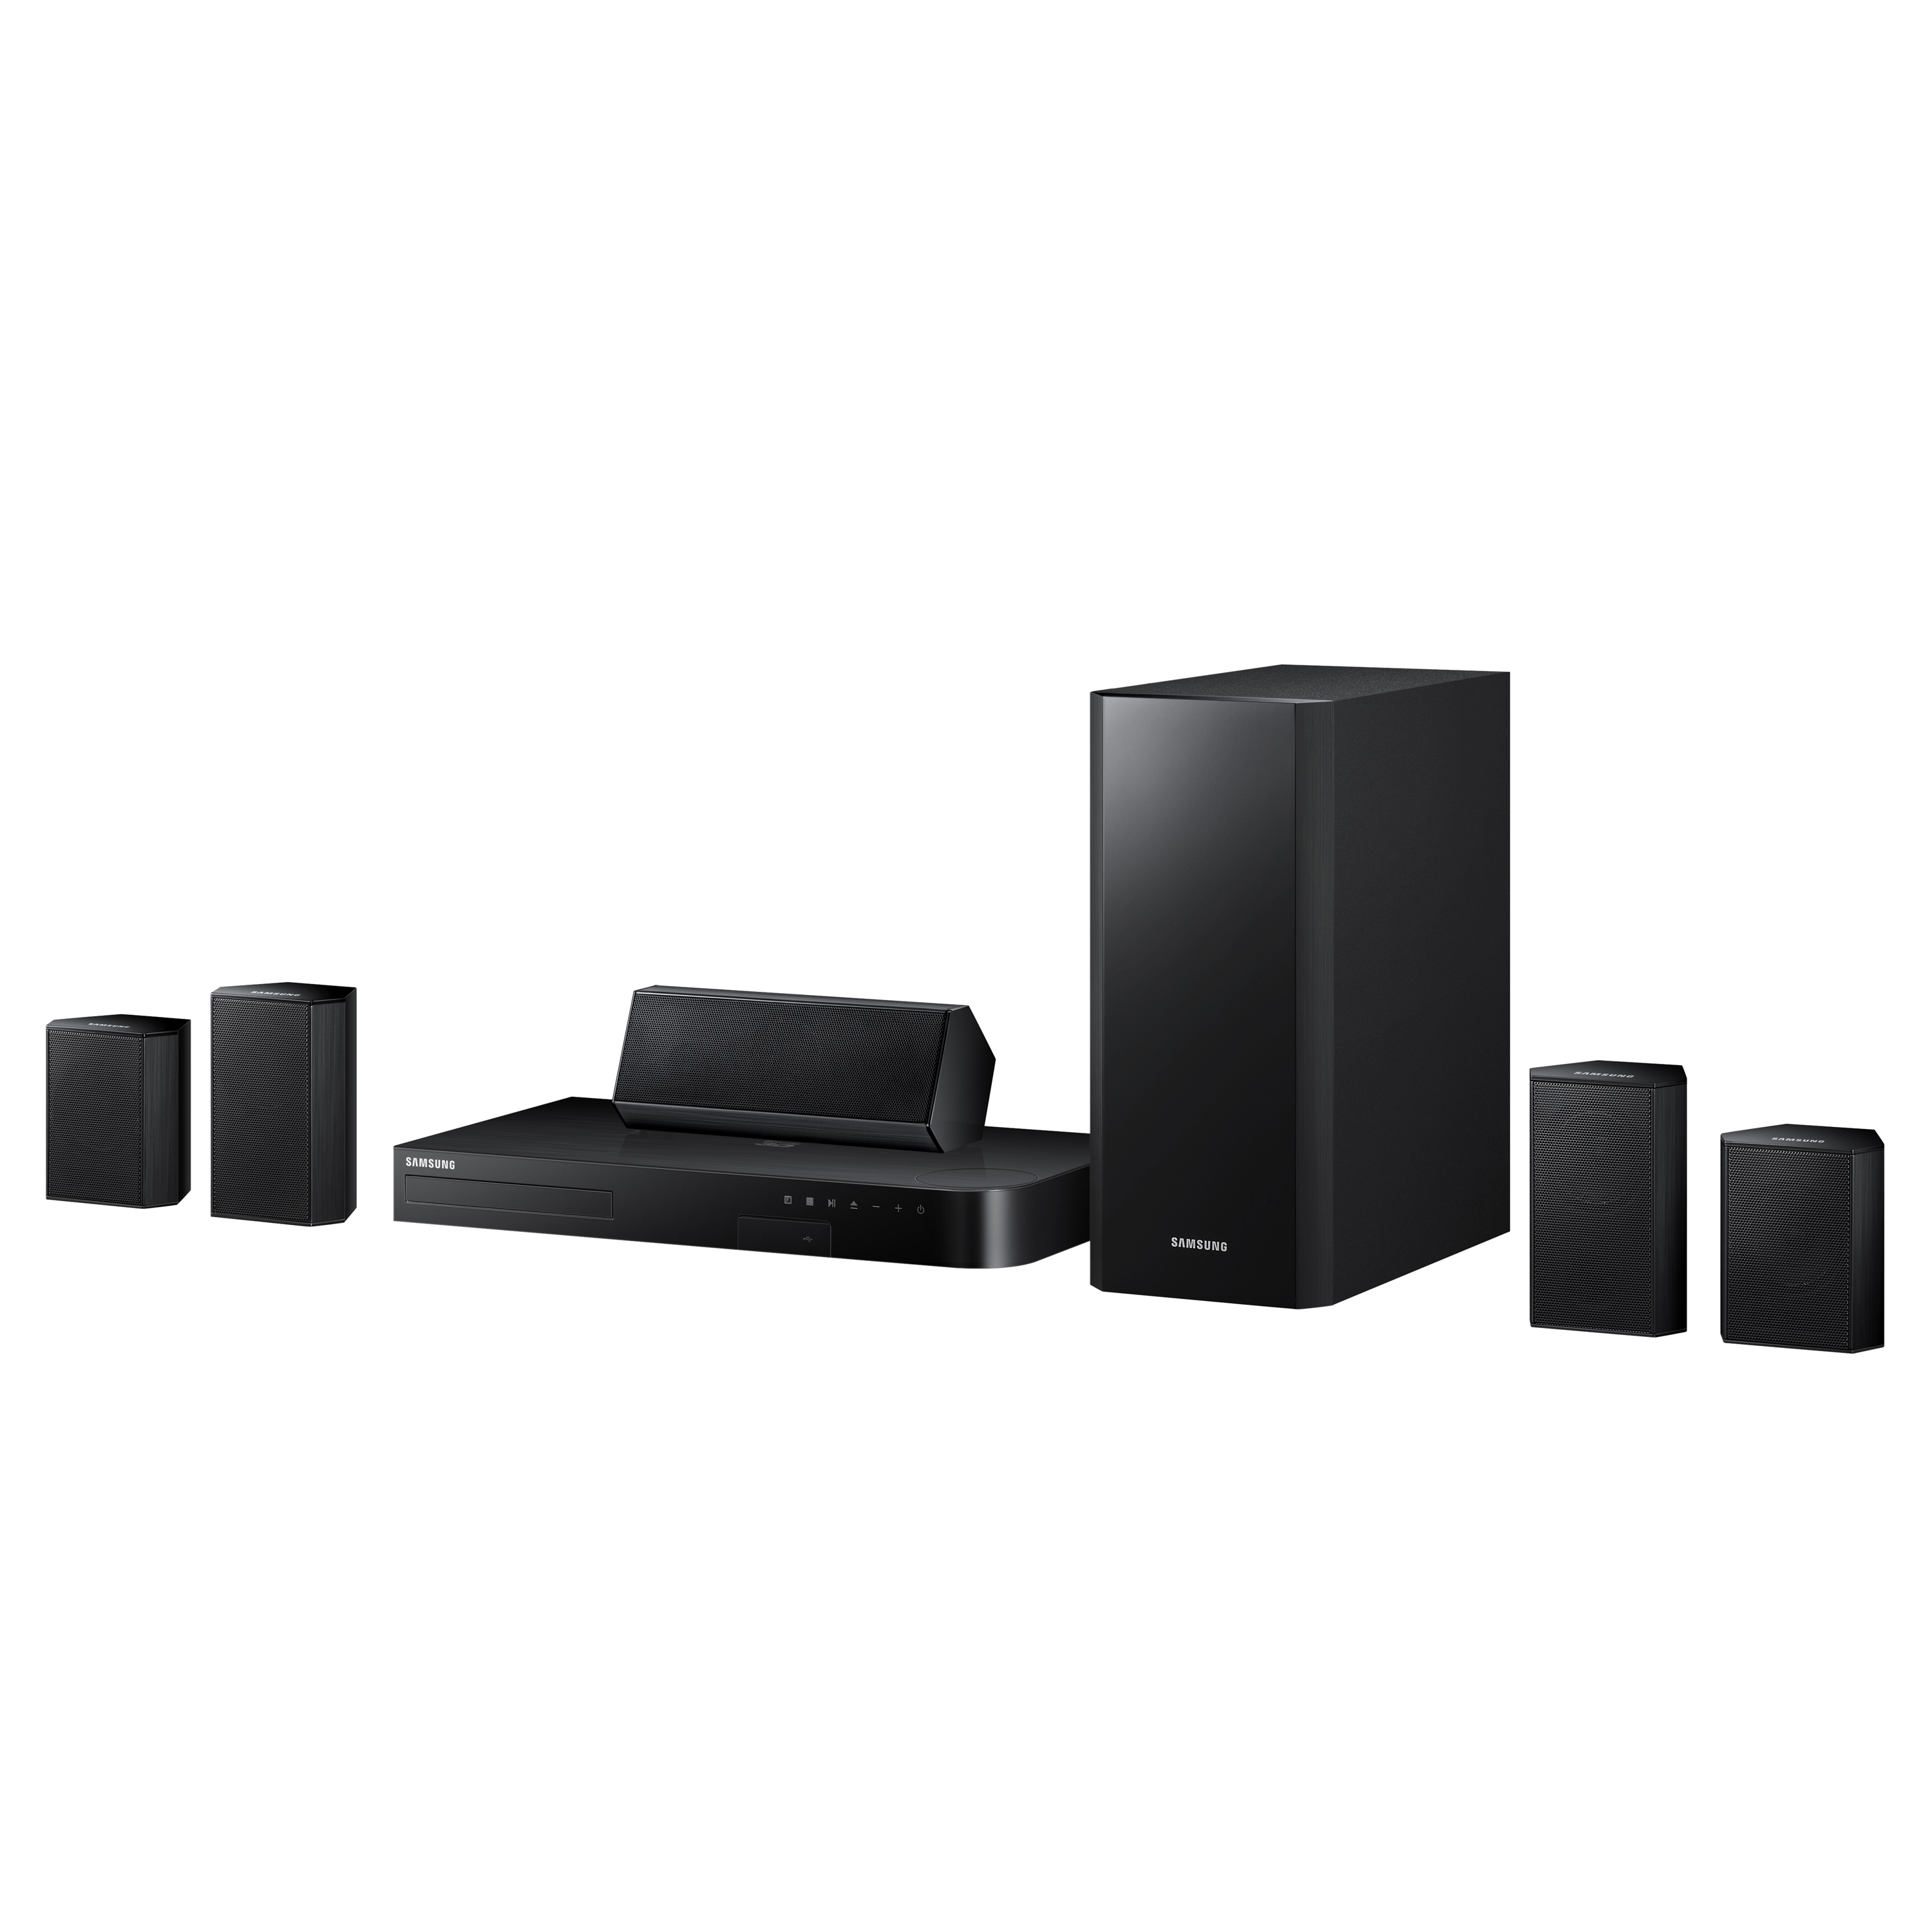 Samsung Ht-hm55 Home Theater - image 1 of 2